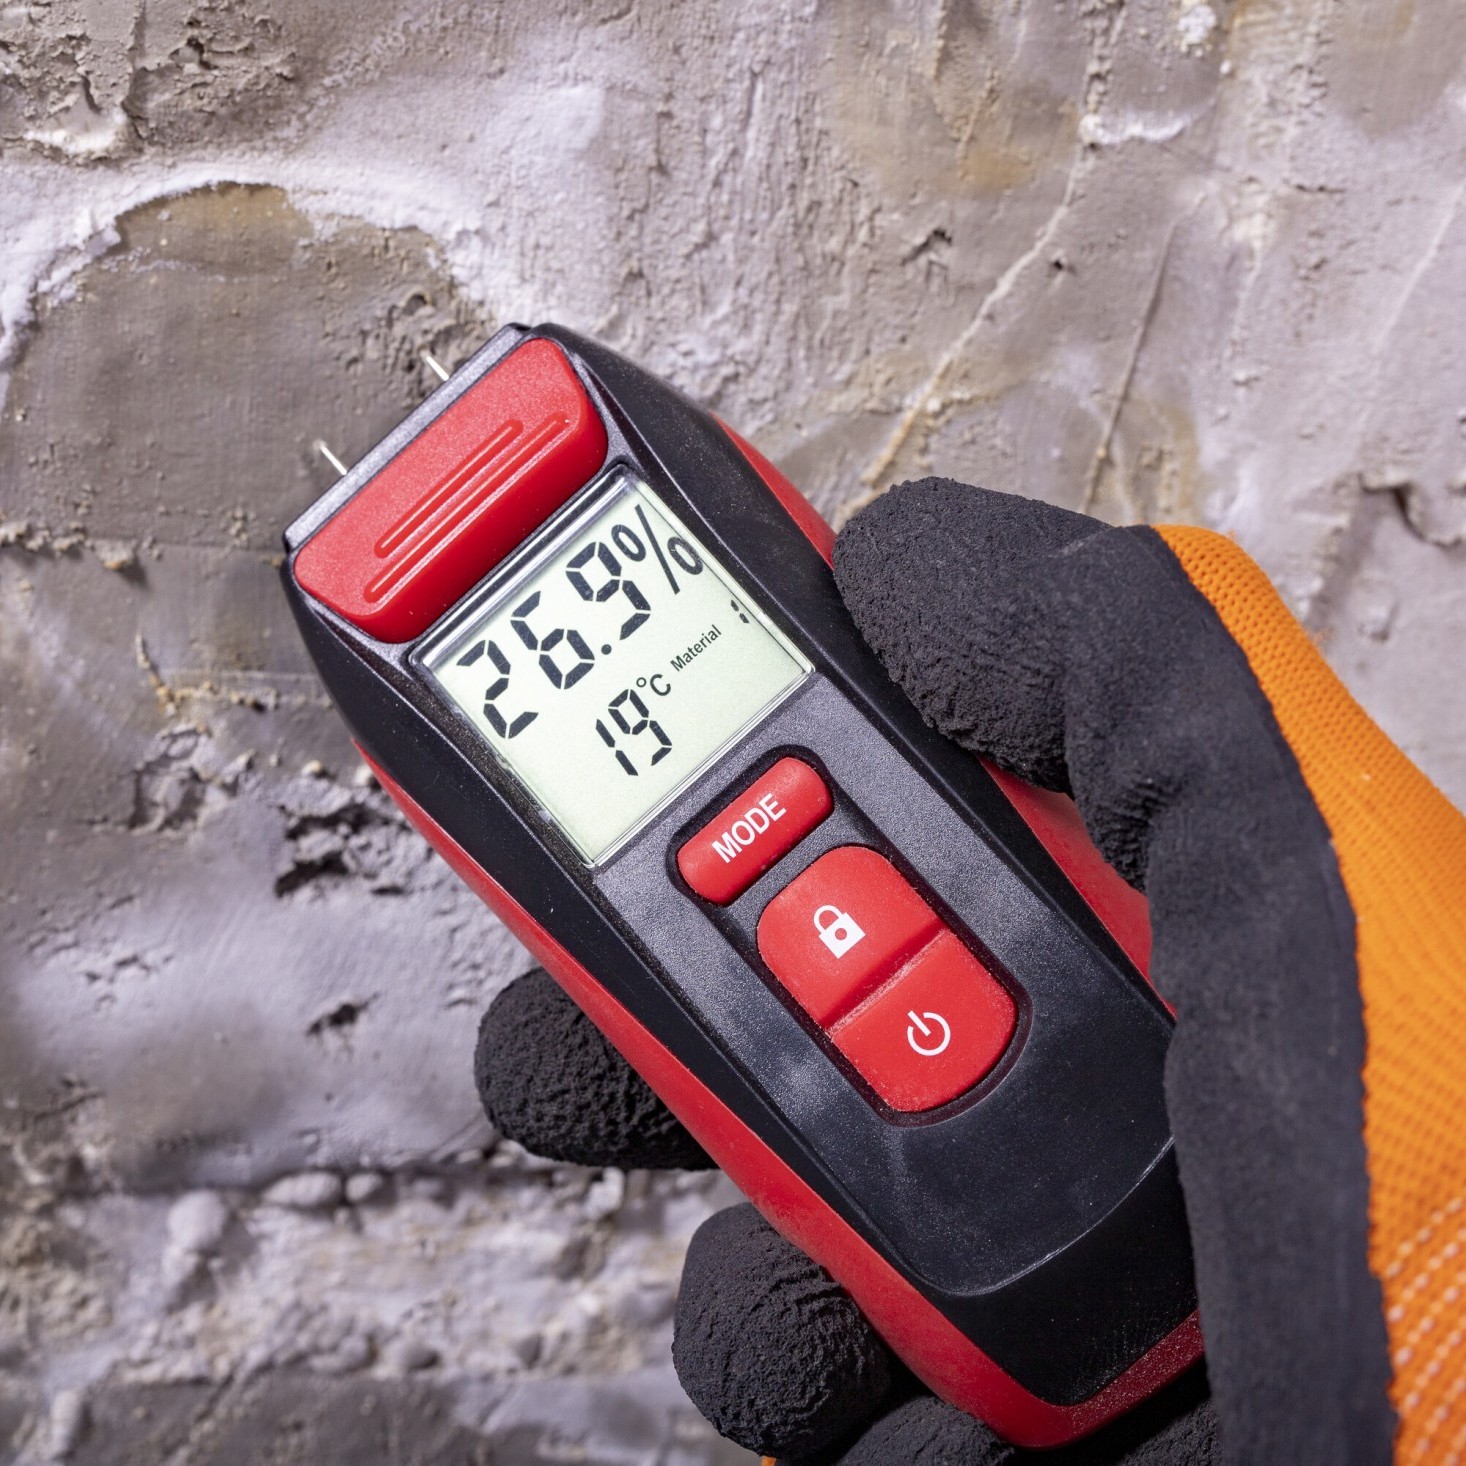 Frequently Asked Questions about Basement Waterproofing in North York